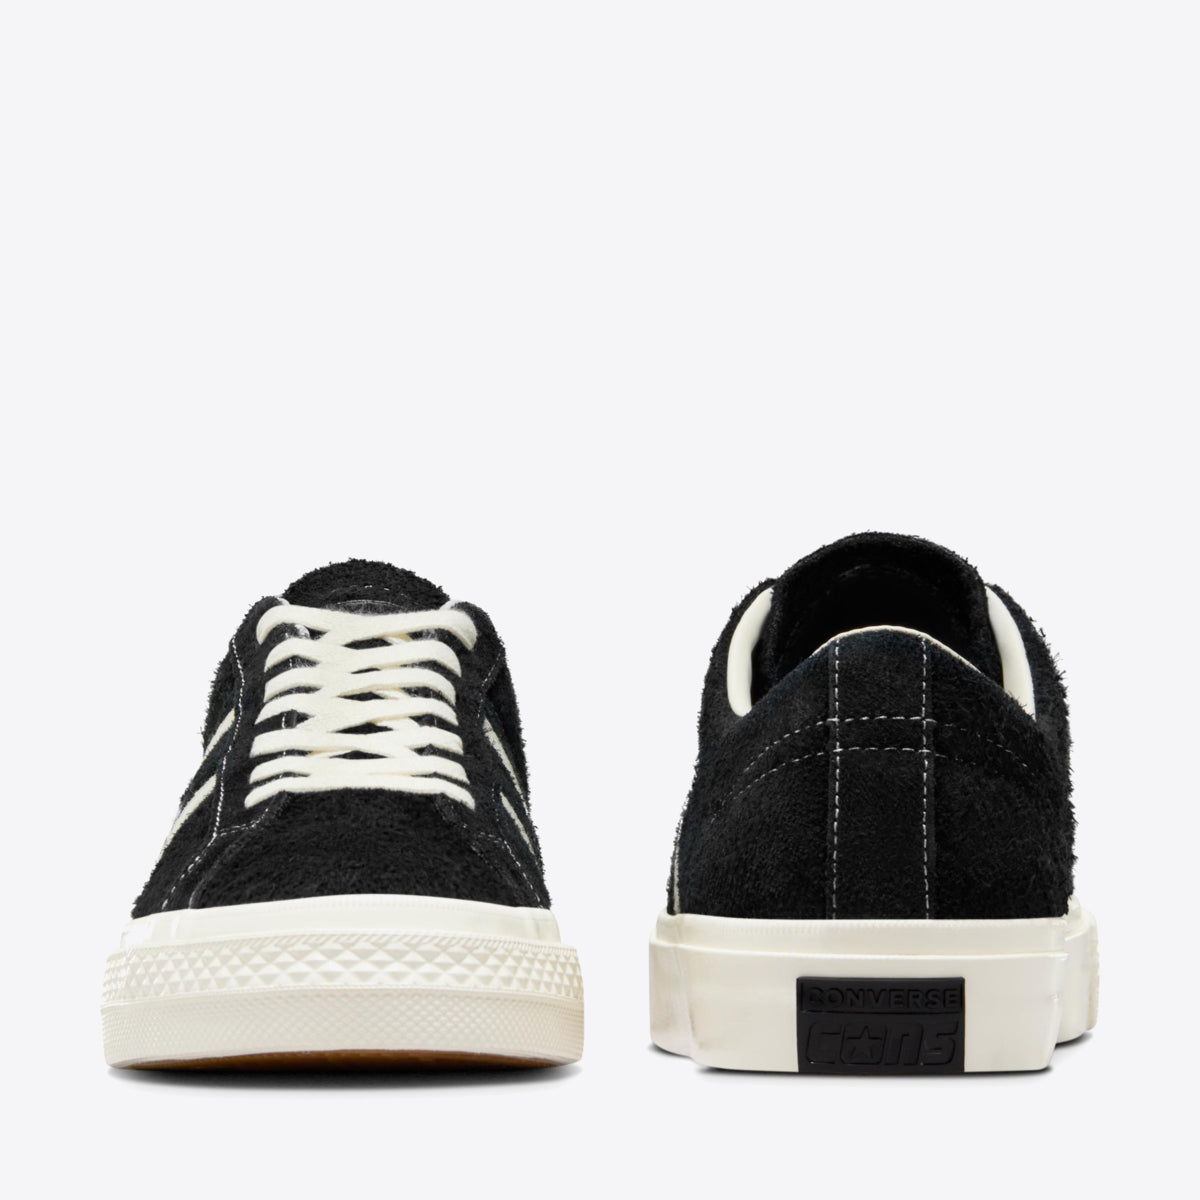 CONVERSE One Star Academy Pro Low Black/Egret - Image 7